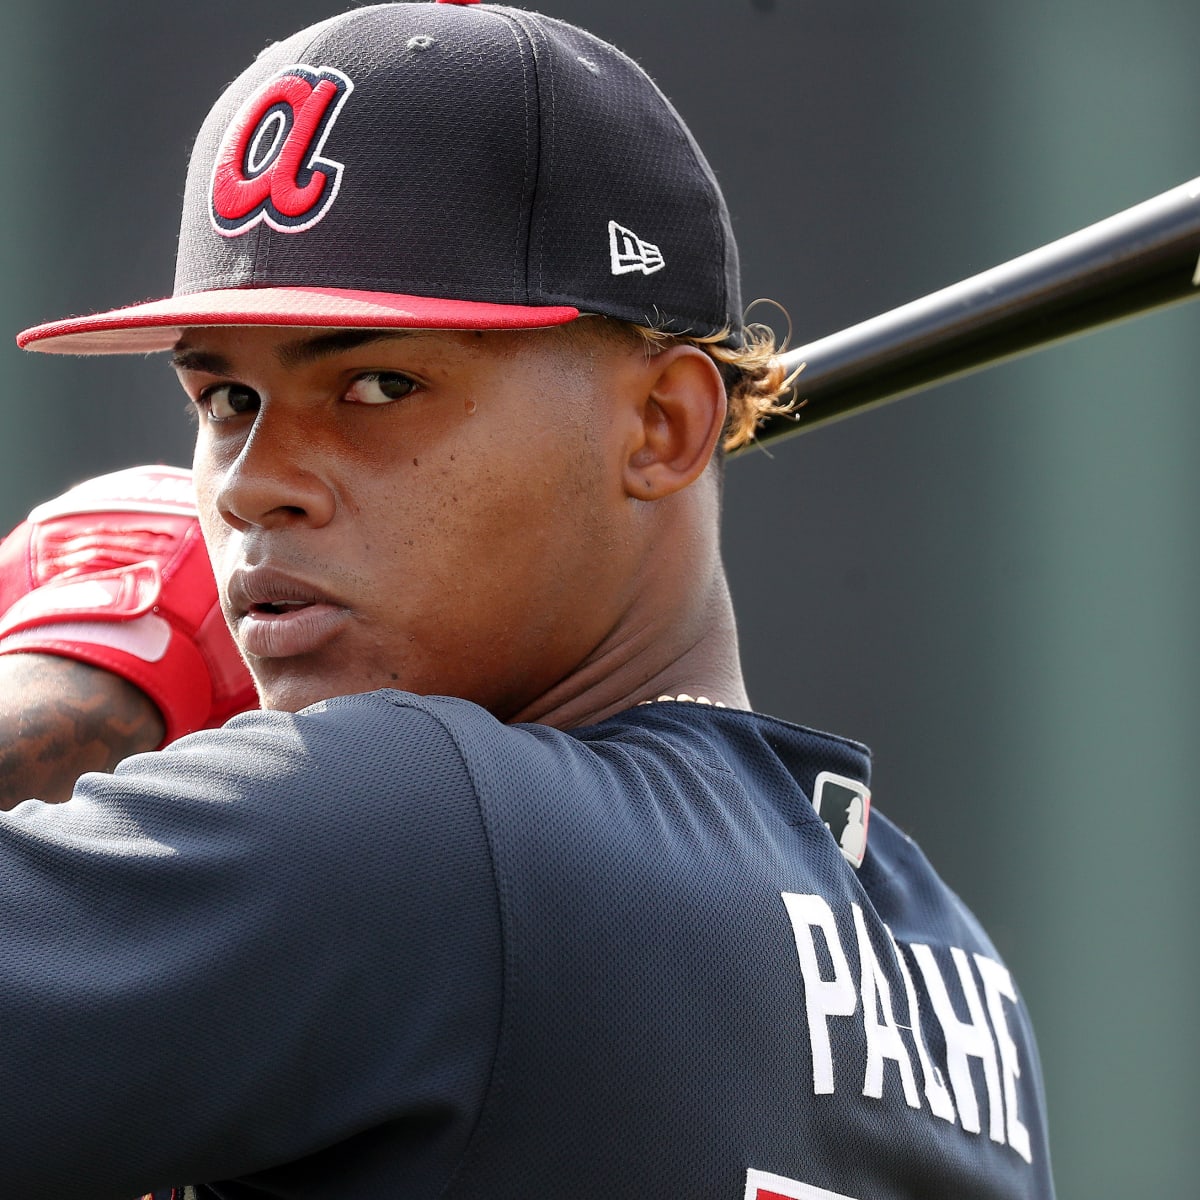 Braves prospects fill the top prospect lists for MLB.com and